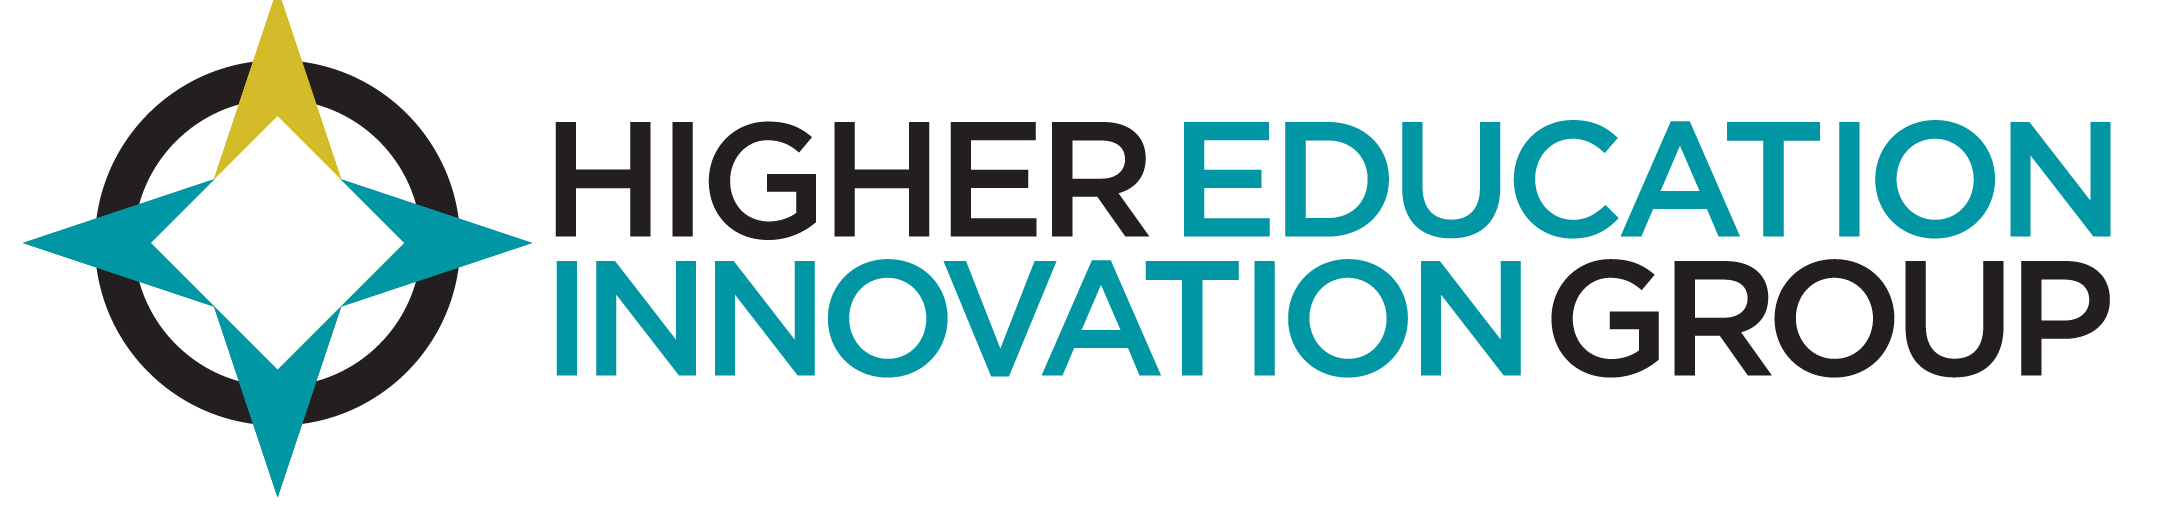 Higher Education Innovation Group